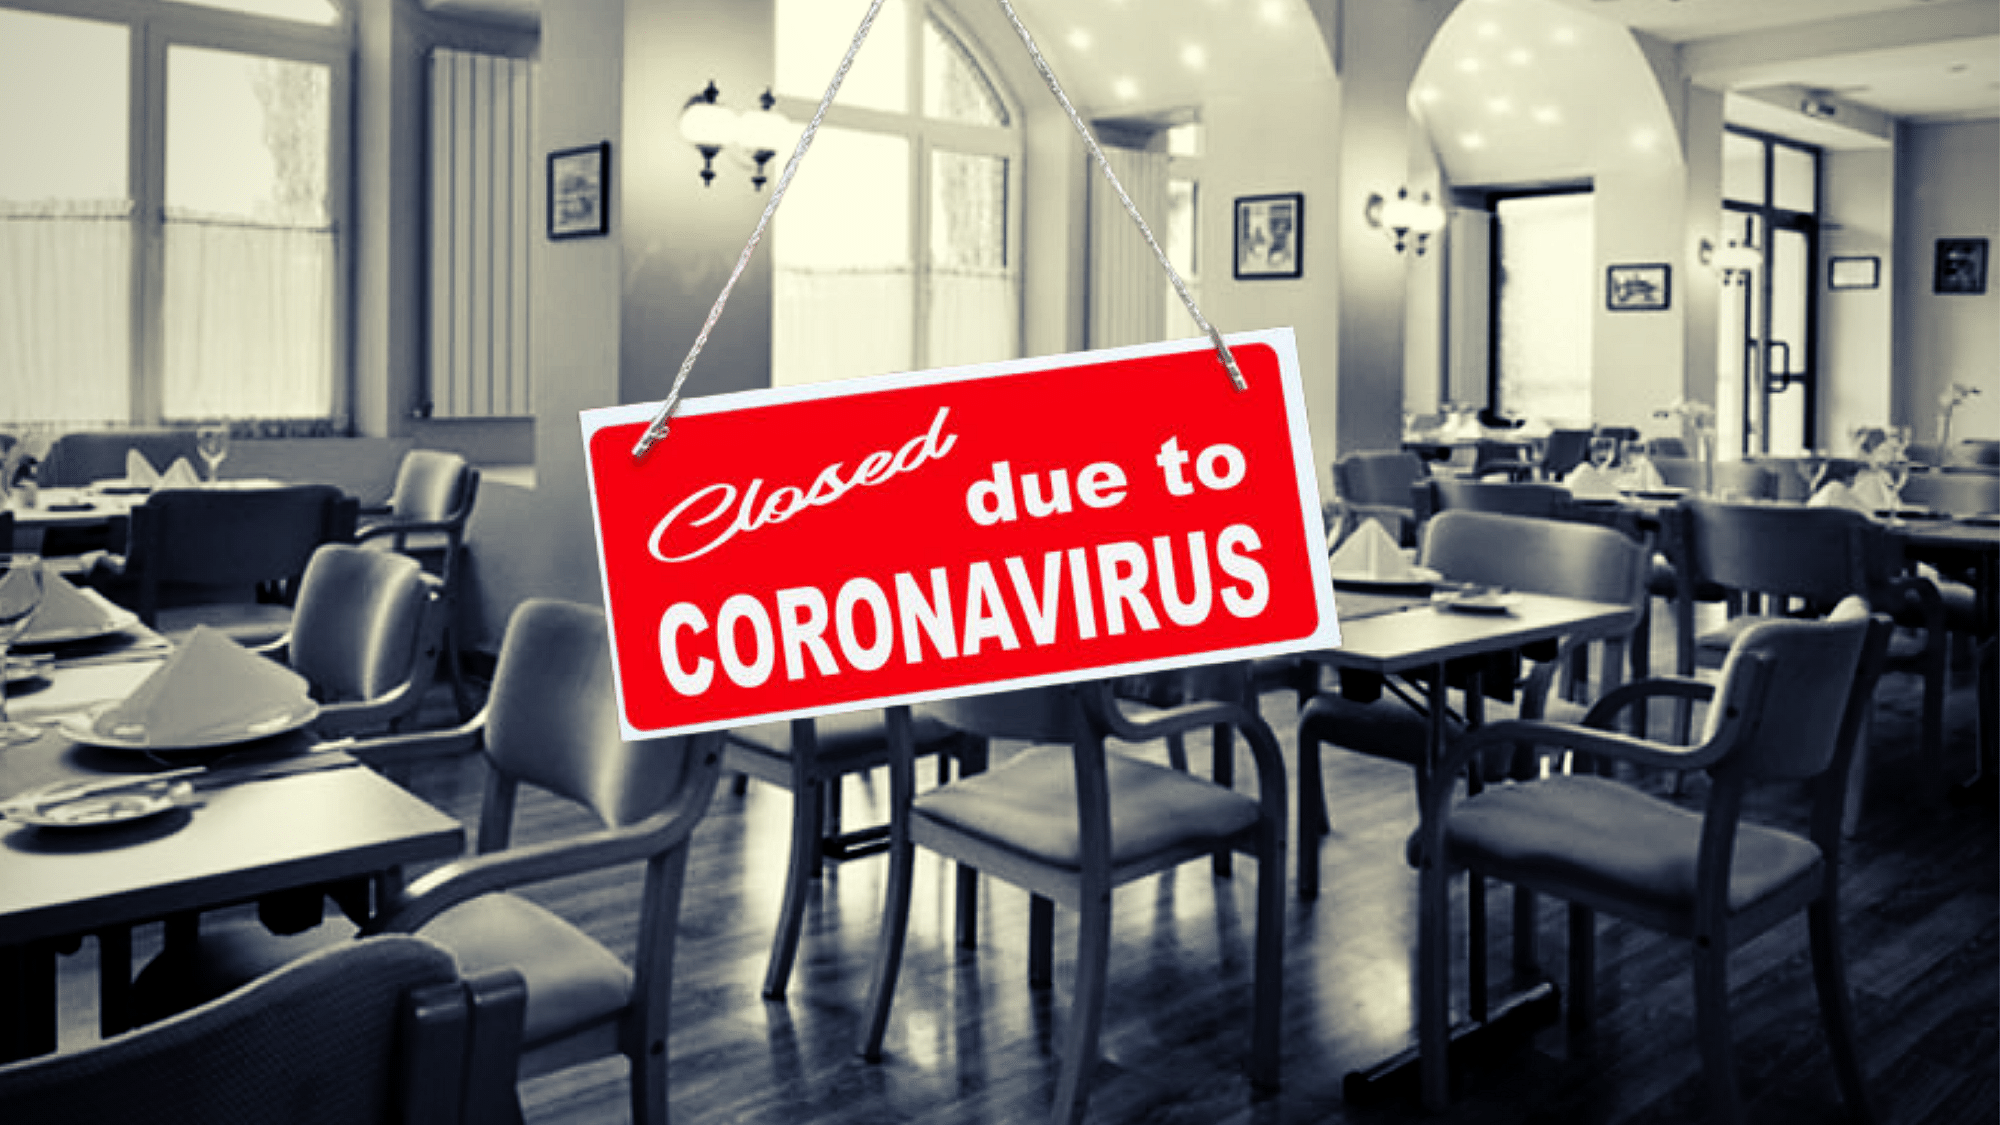 Here is the fallout of the ongoing coronavirus pandemic on the food services sector.